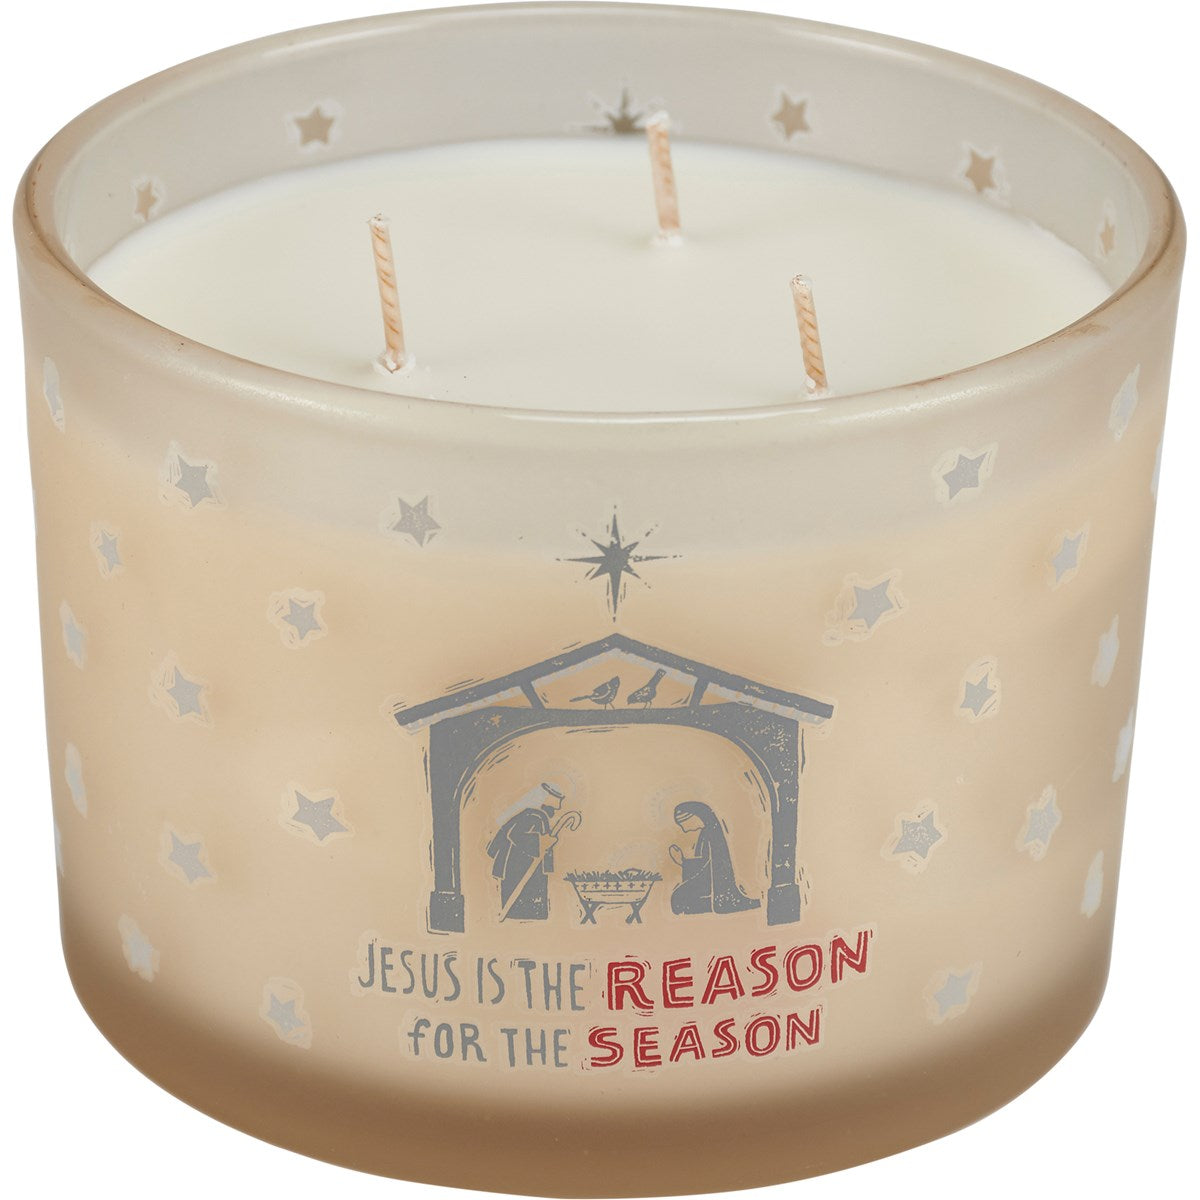 JESUS IS THE REASON JAR CANDLE